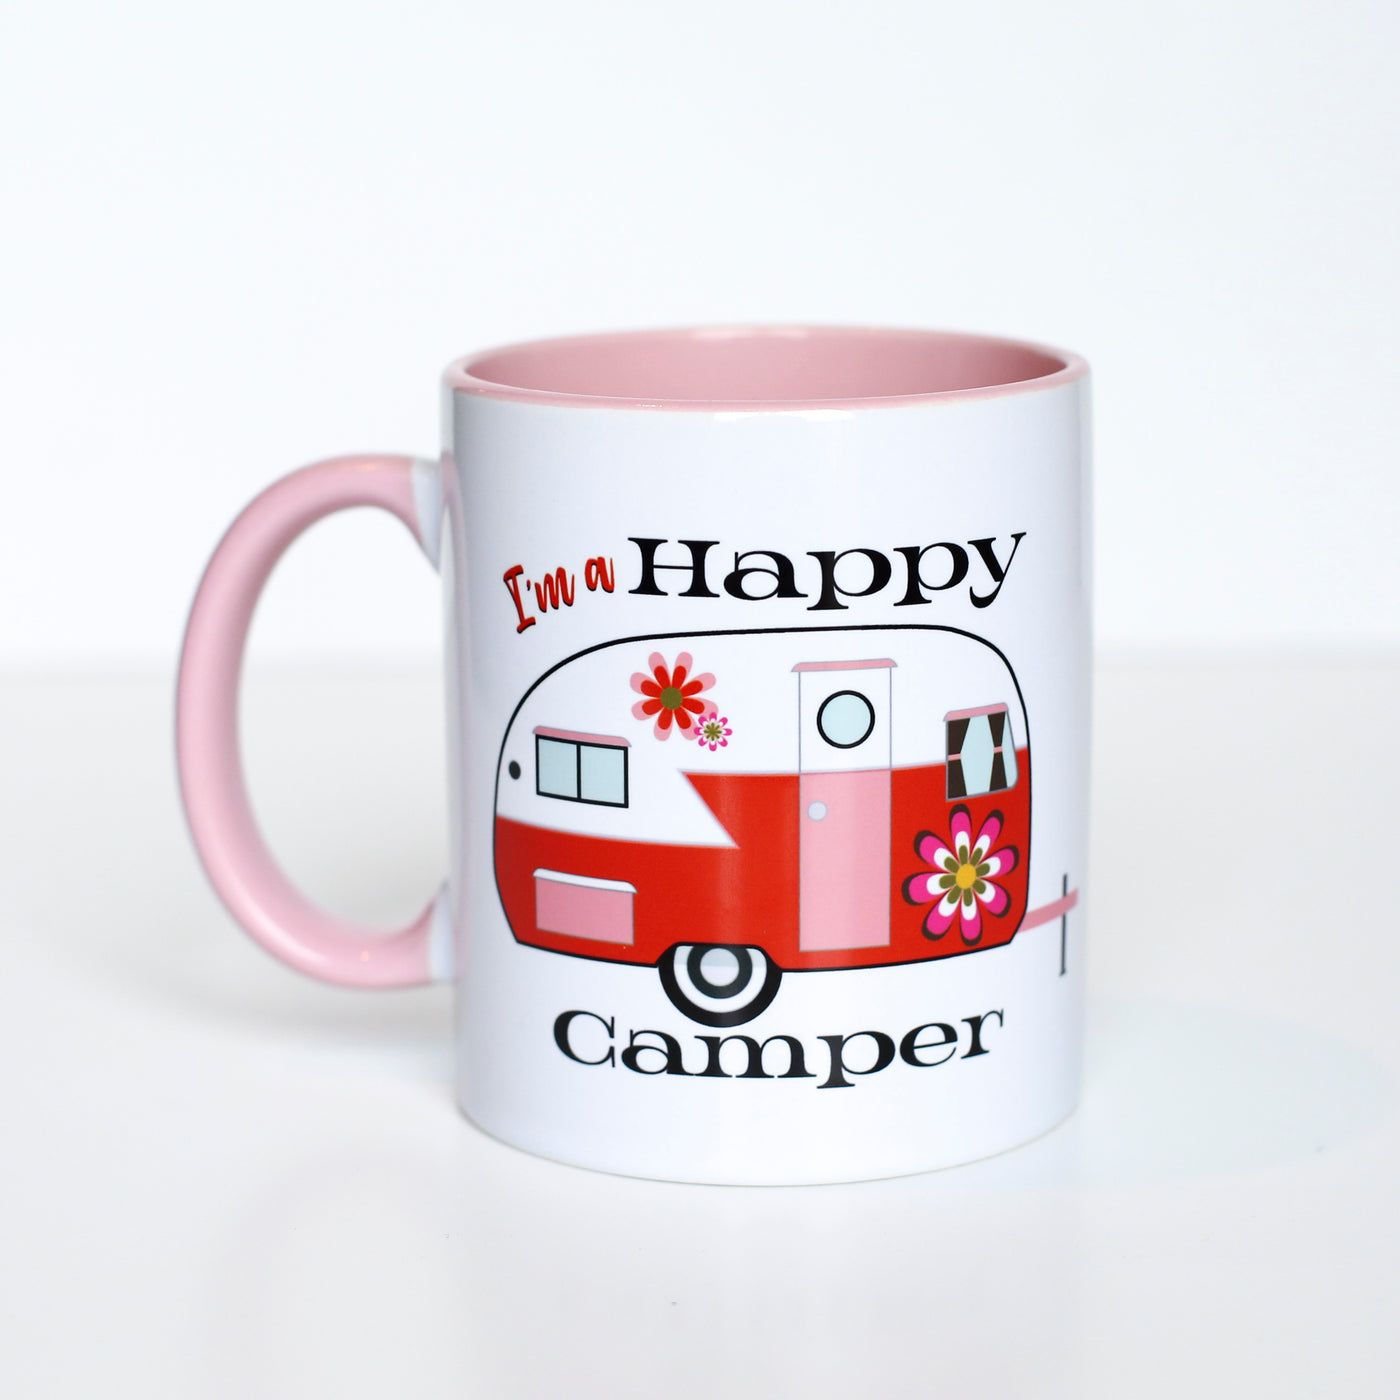 This 60's inspired Happy Camper with groovy flowers coffee mug gives you something special to wake up to besides the coffee! This vibrant mug features inside/handle color that will enhance the most creative of designs. Perfect for summer gifts, the Glamper Girl, or just to feel love on the bright side!  Ceramic mug with contrasting orange inside and handle coloring 11 oz mug Dishwasher and microwave safe